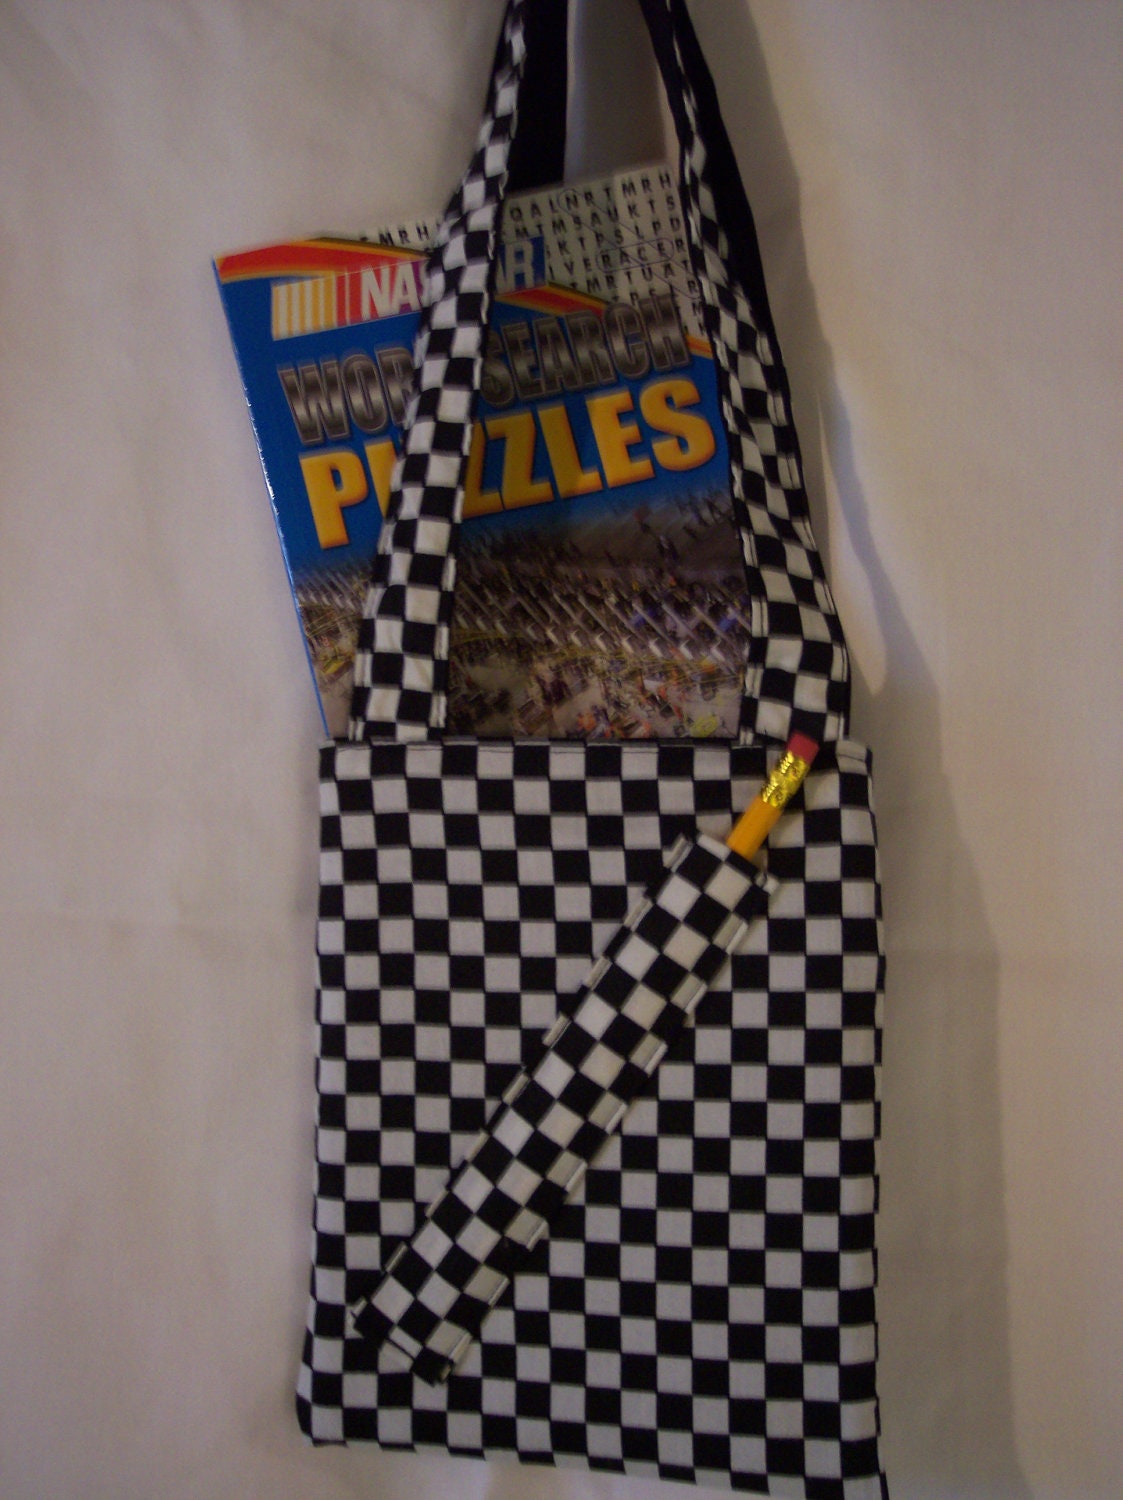 nascar-word-search-puzzle-book-in-a-bag